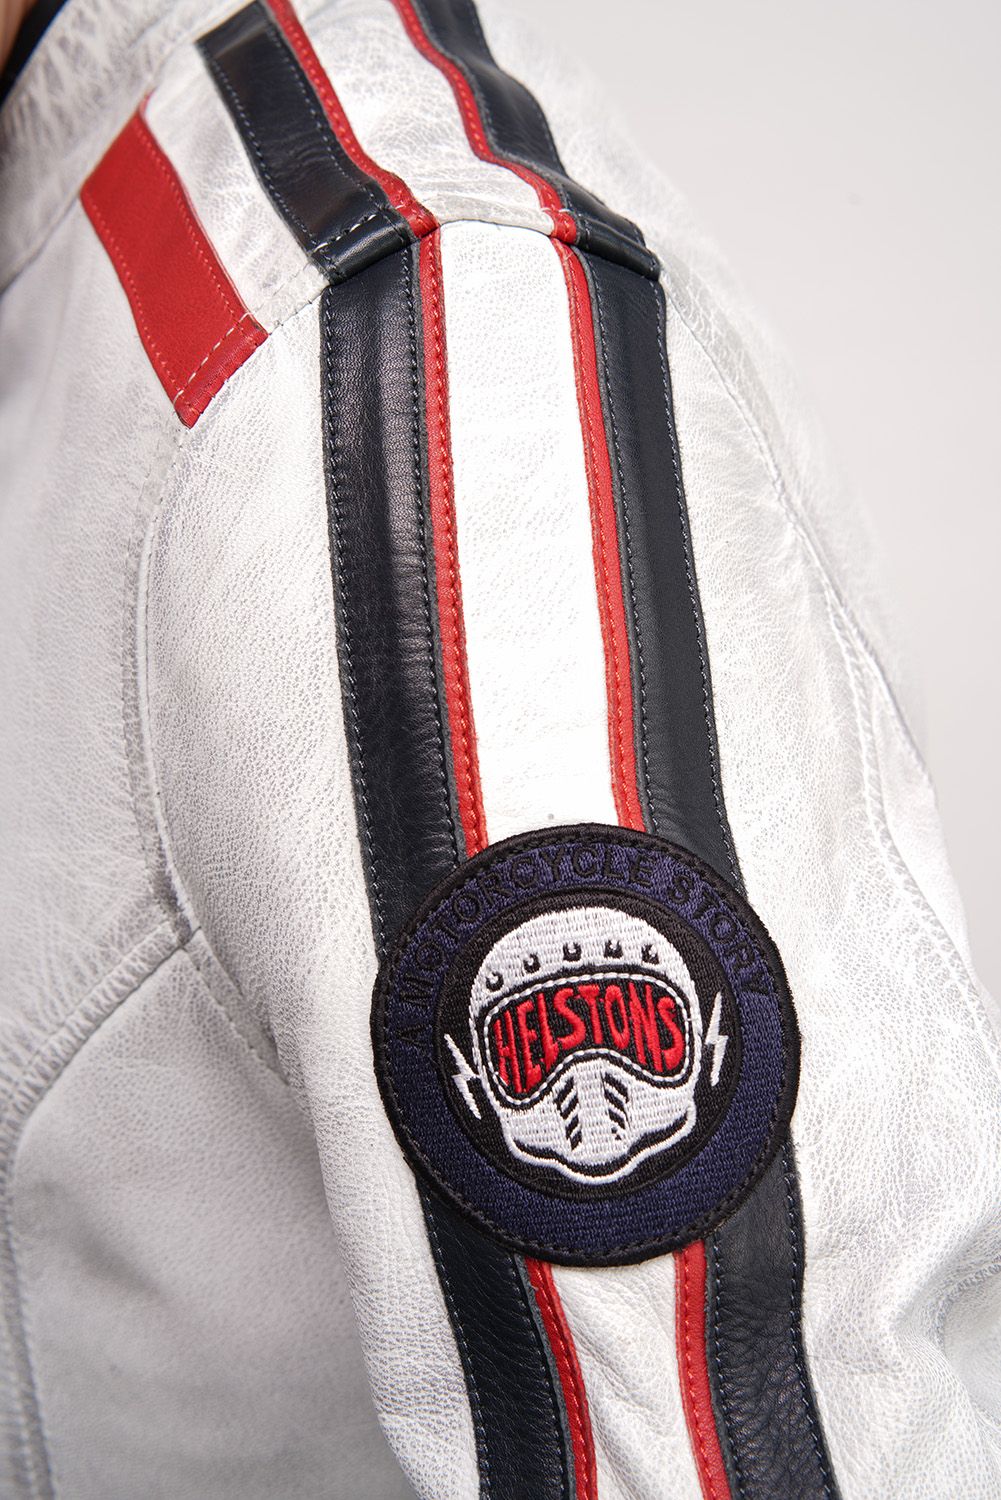 A close up of the Helstons patch on a white motorcycle jacket with stripes